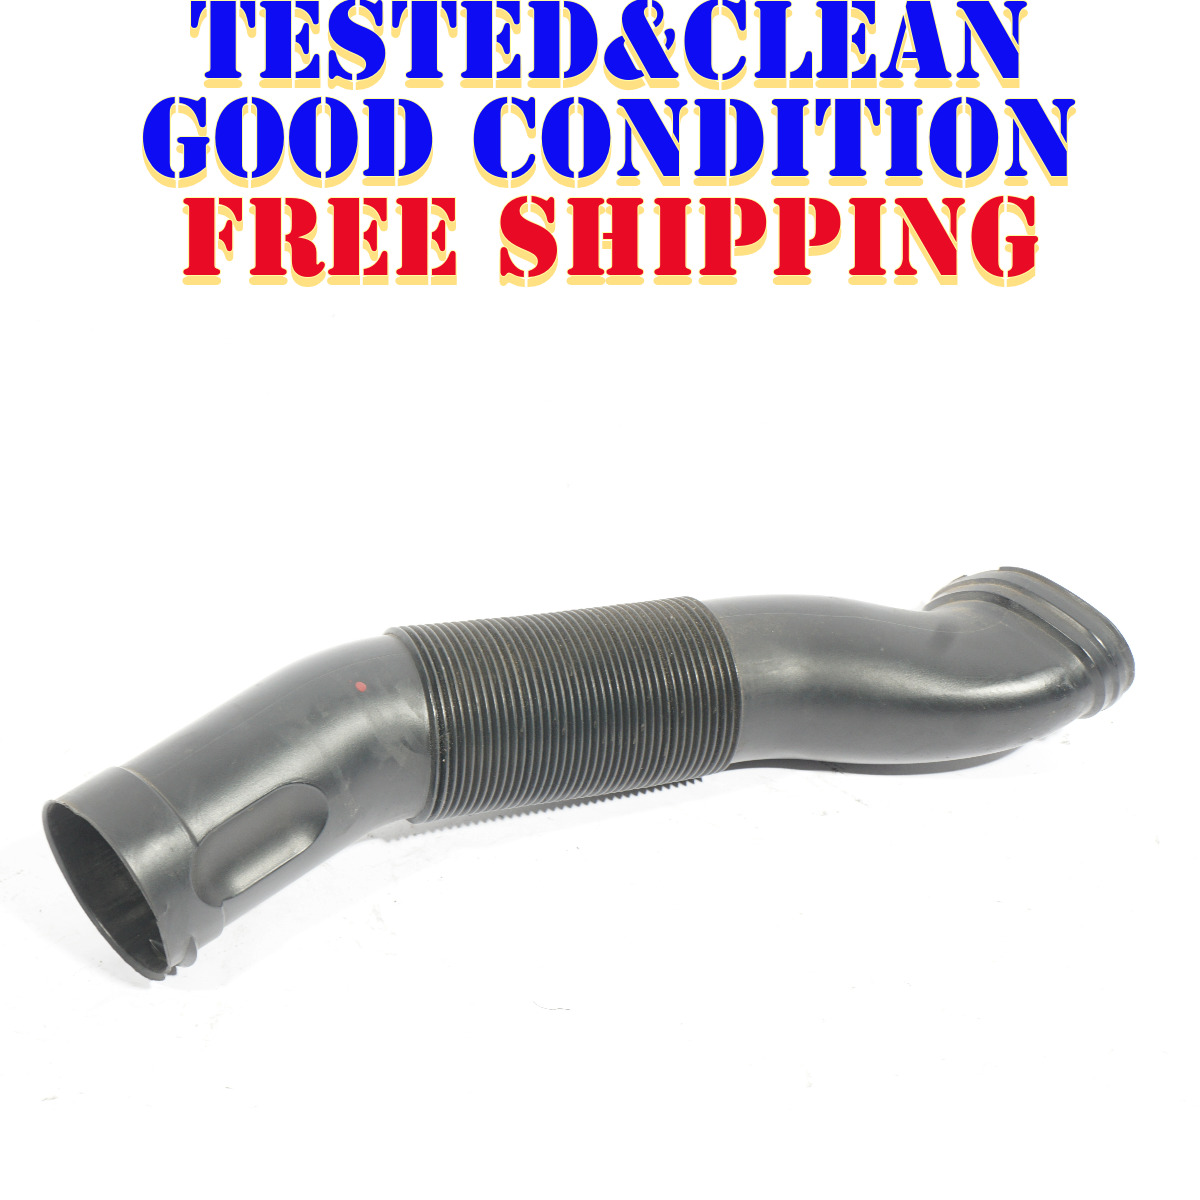 00-02 MERCEDES S500 W220 LEFT DRIVER SIDE AIR INTAKE HOSE PIPE OEM